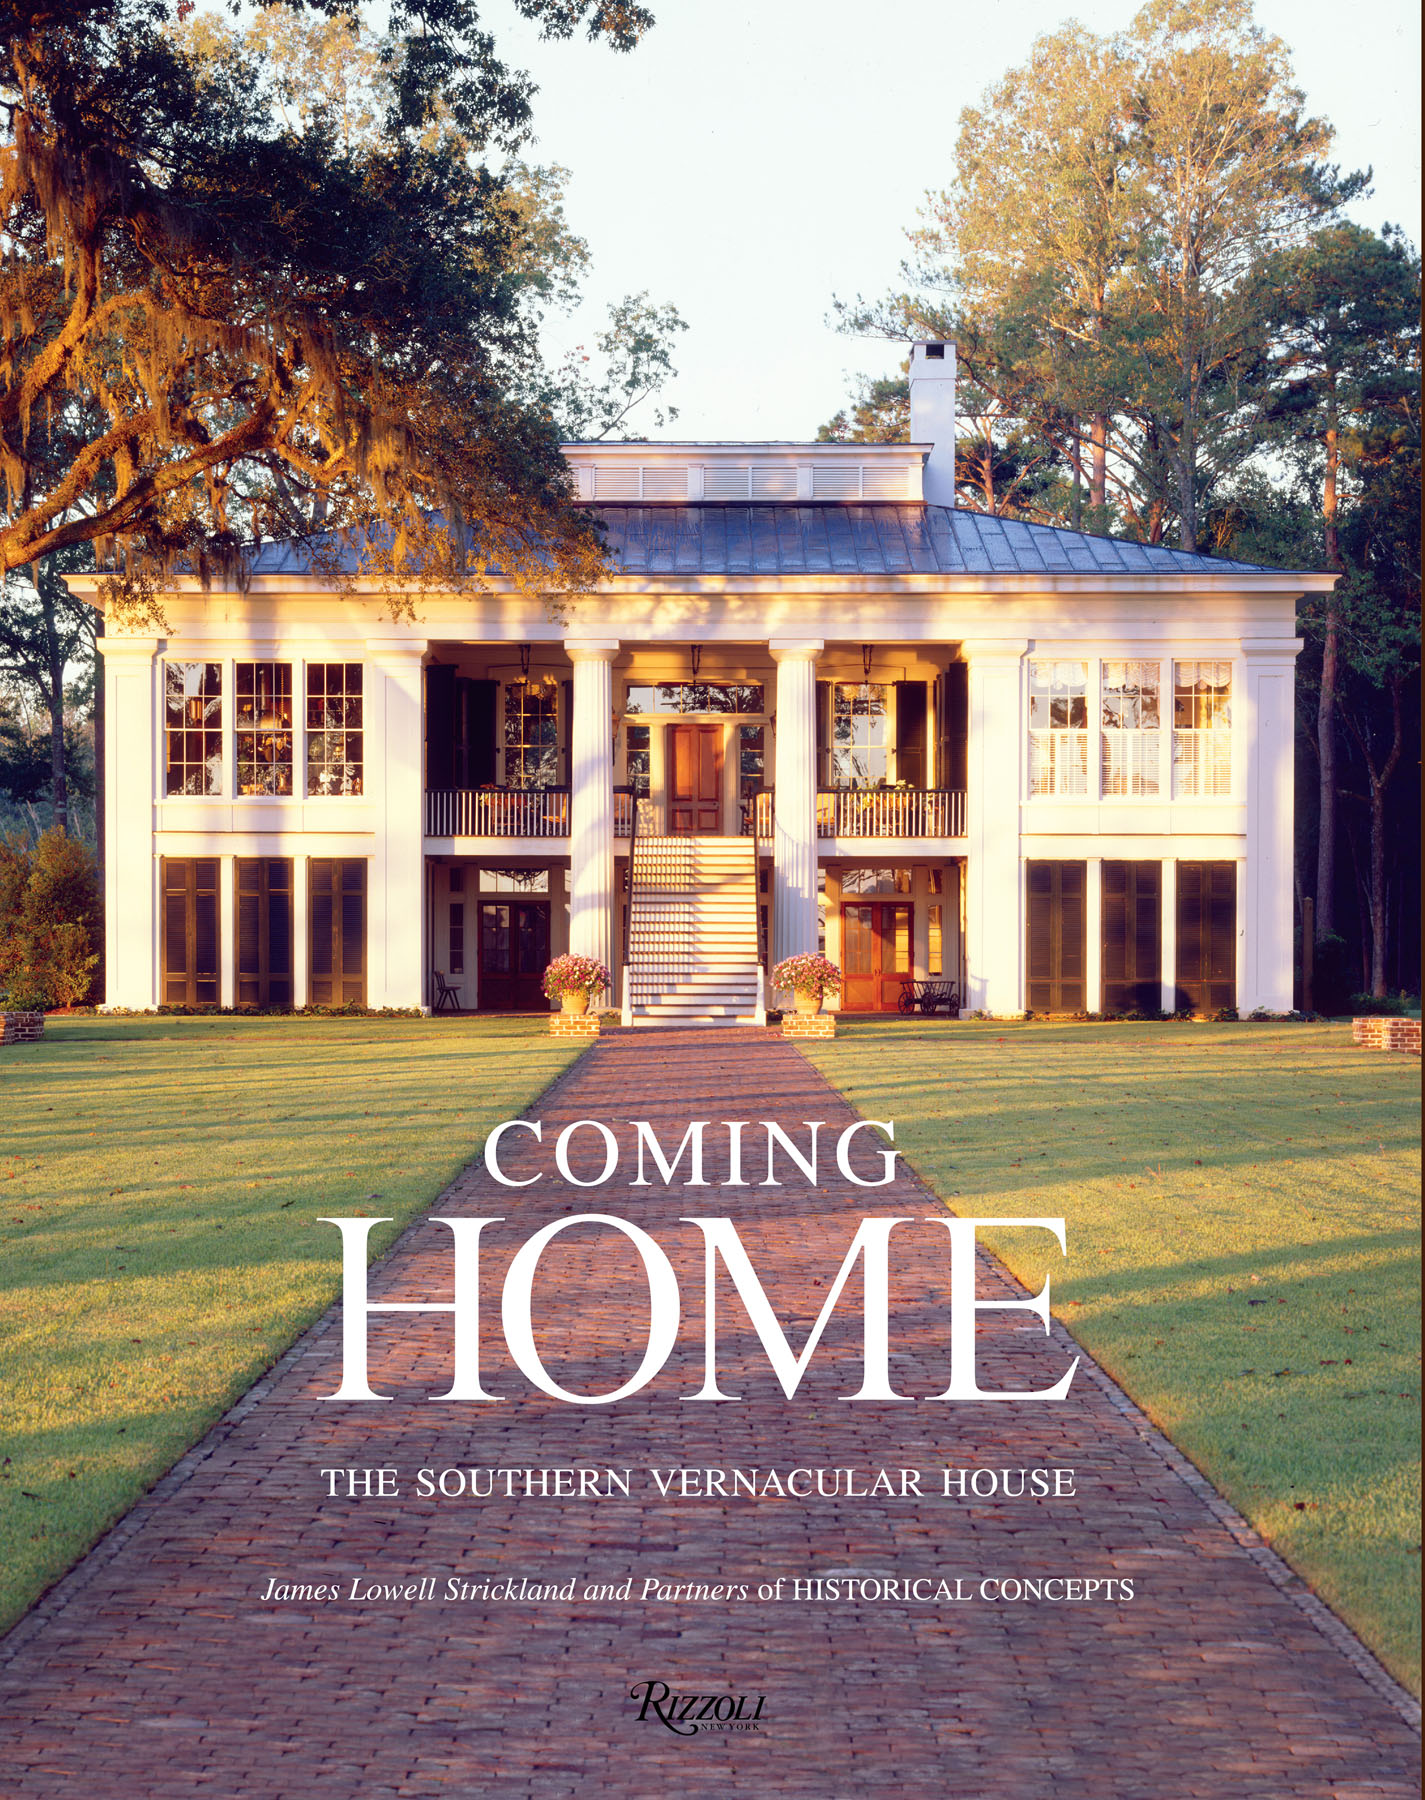 COMING HOME COVER low res file